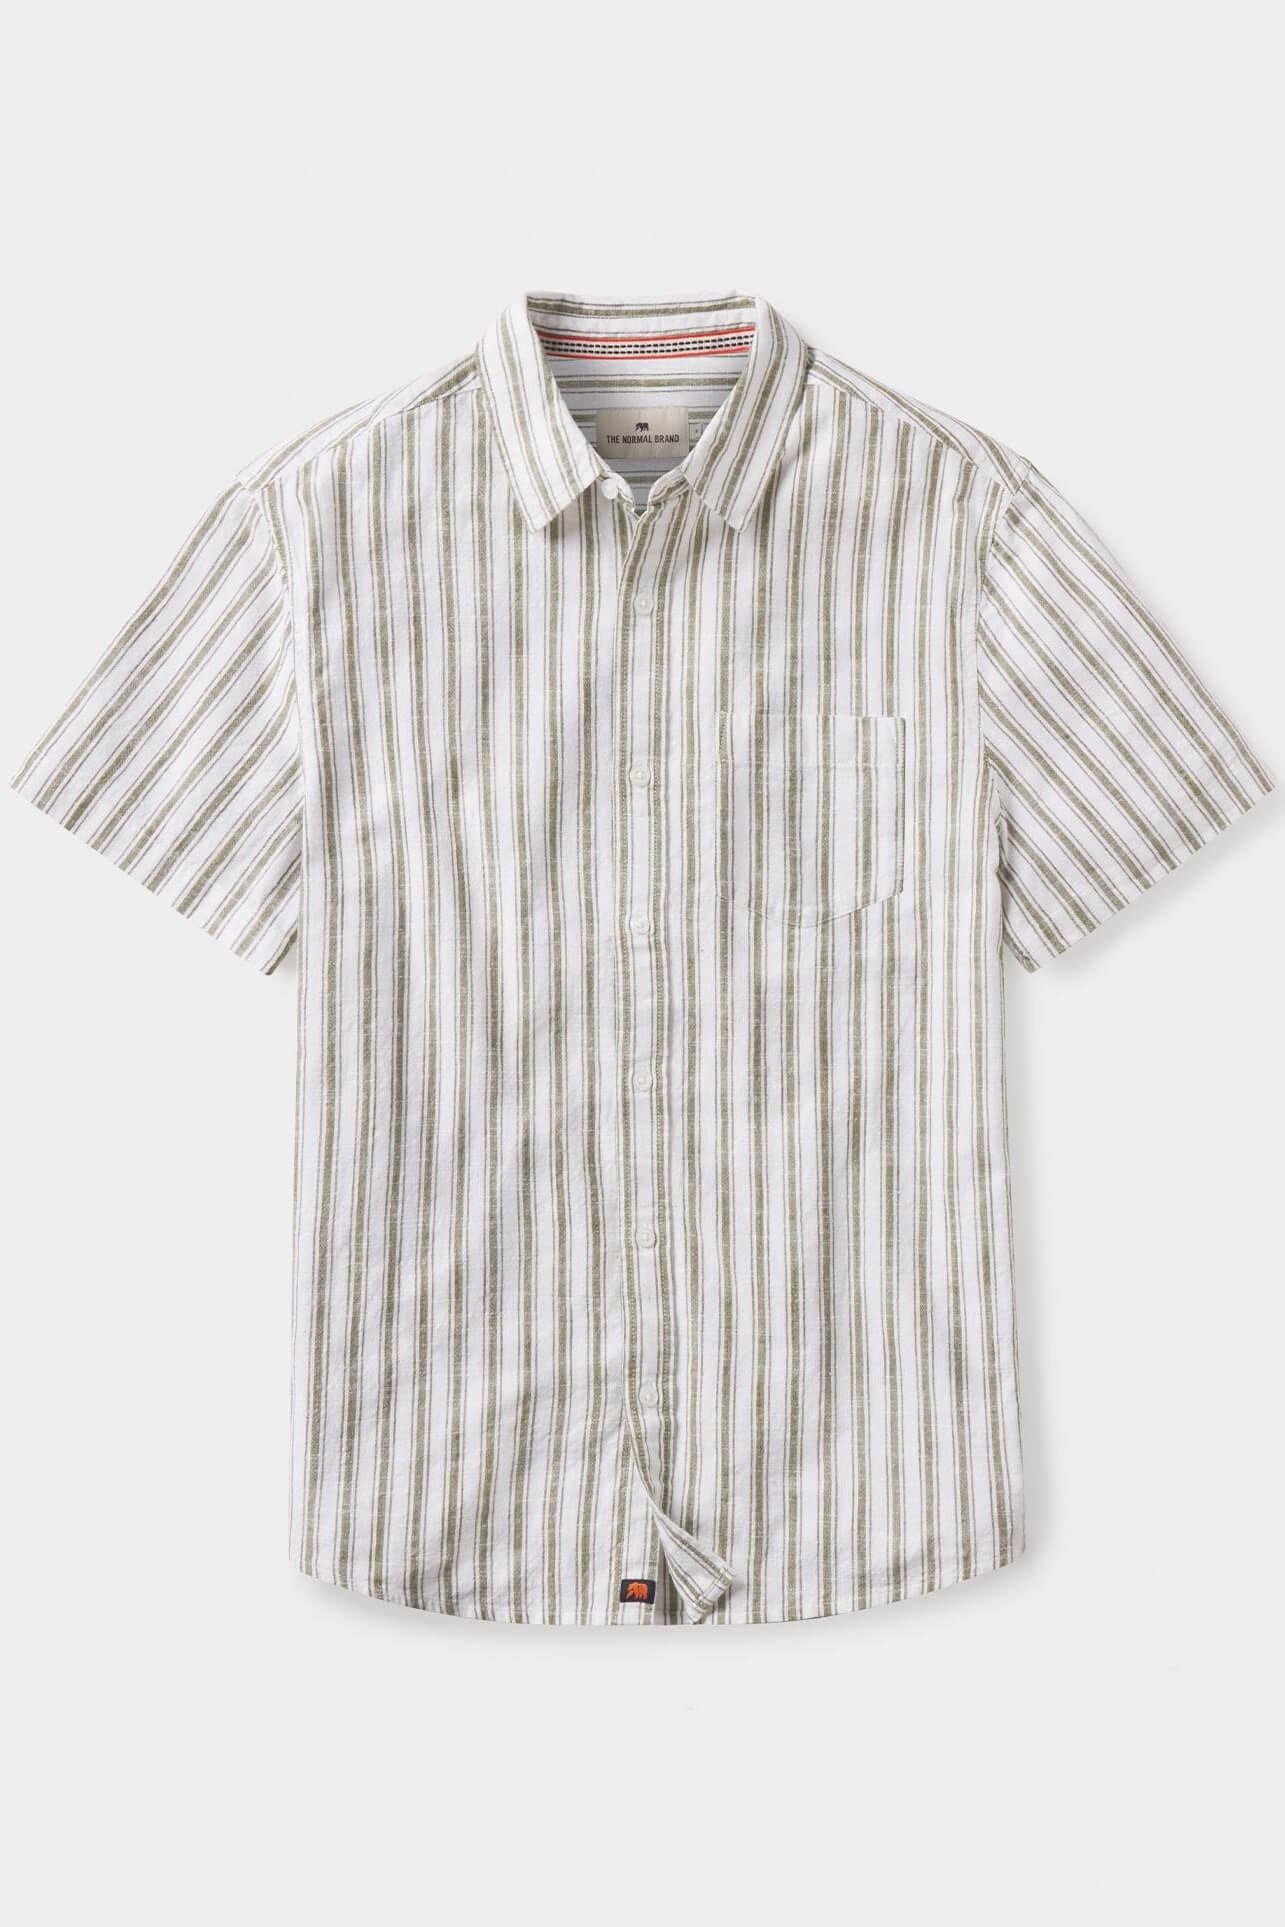 The Normal Brand short sleeved lived in cotton button up in pine needle stripe